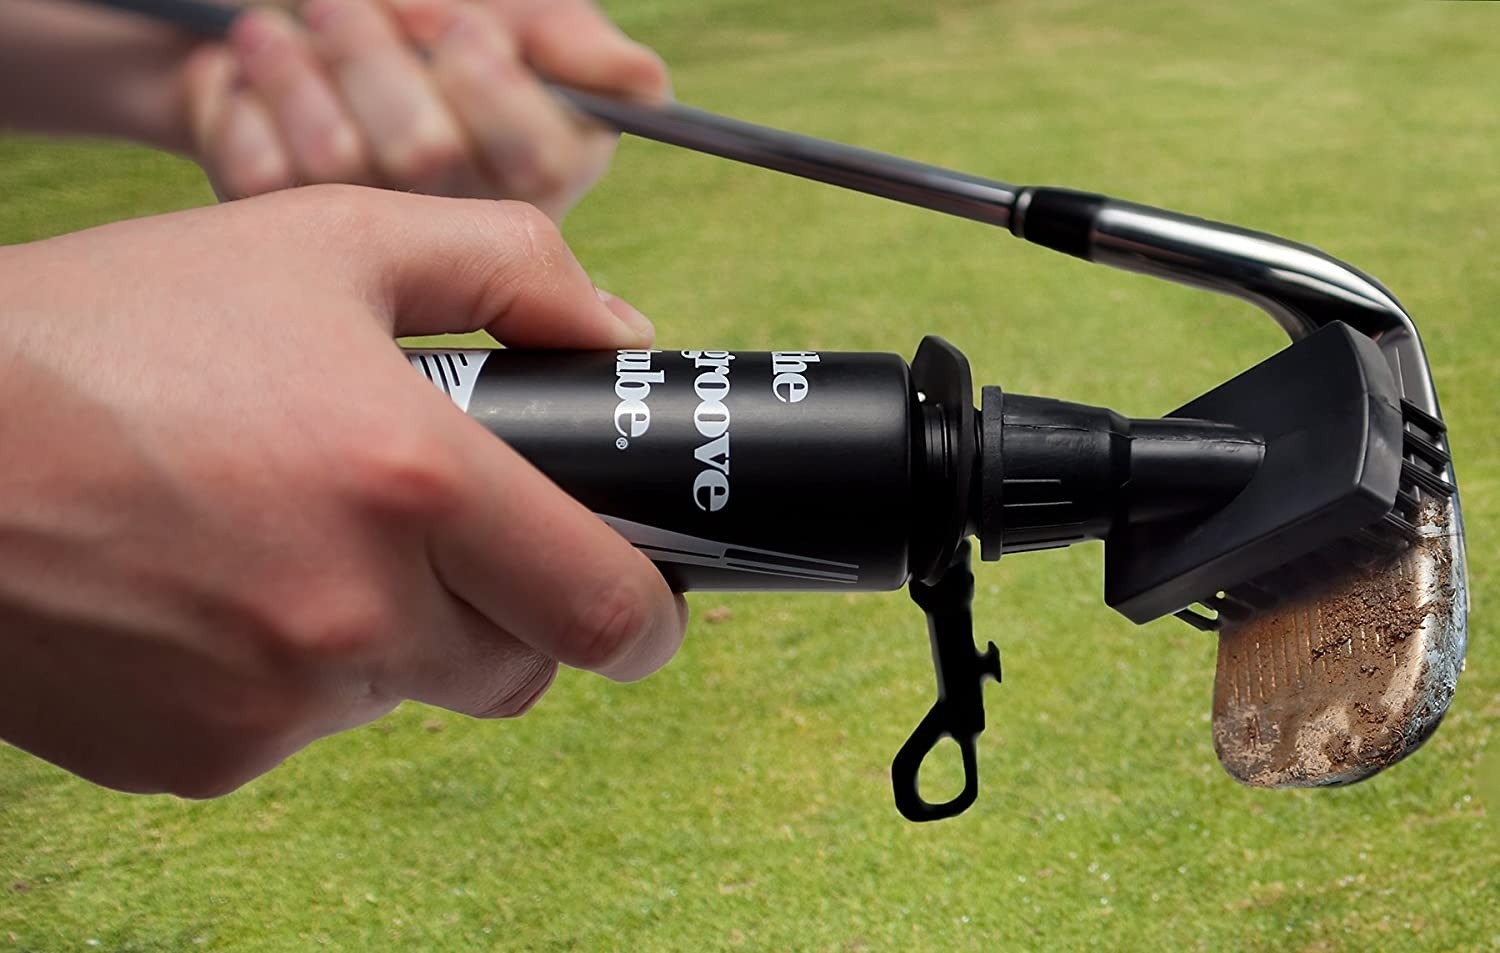 a squeeze bottle with a brush attached that cleans golf clubs